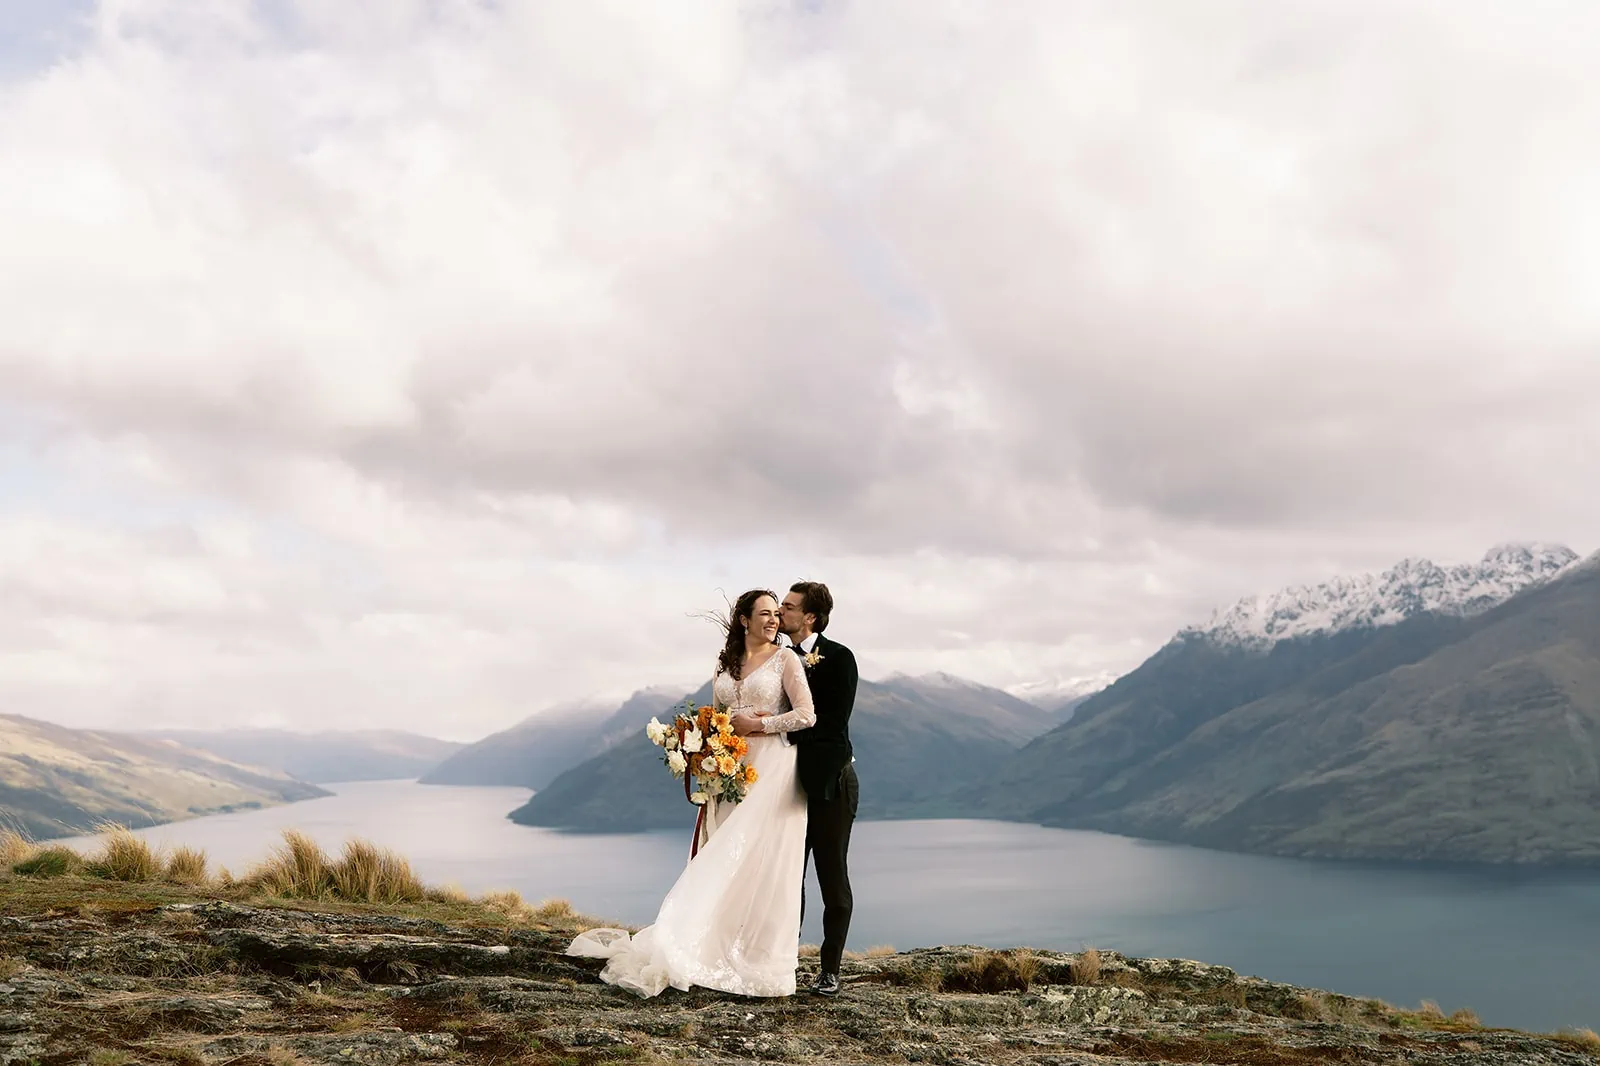 Queenstown Wedding Photographer A bride and groom enjoying their Queenstown heli-wedding package on top of a mountain overlooking Lake Wanaka.